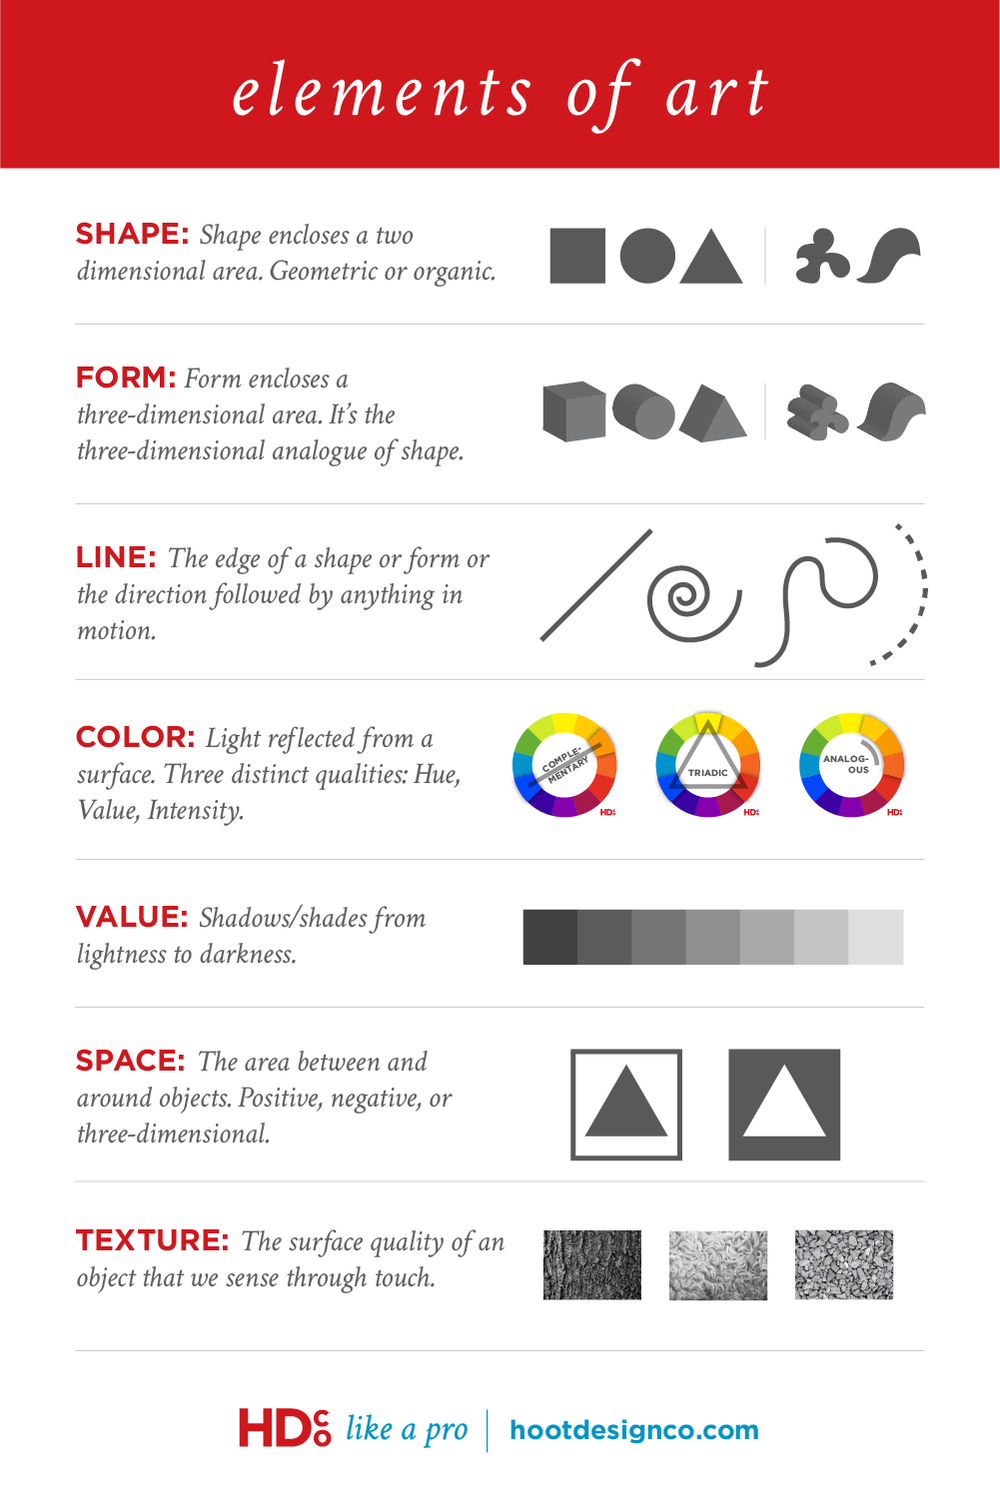 7 elements of art and their definitions